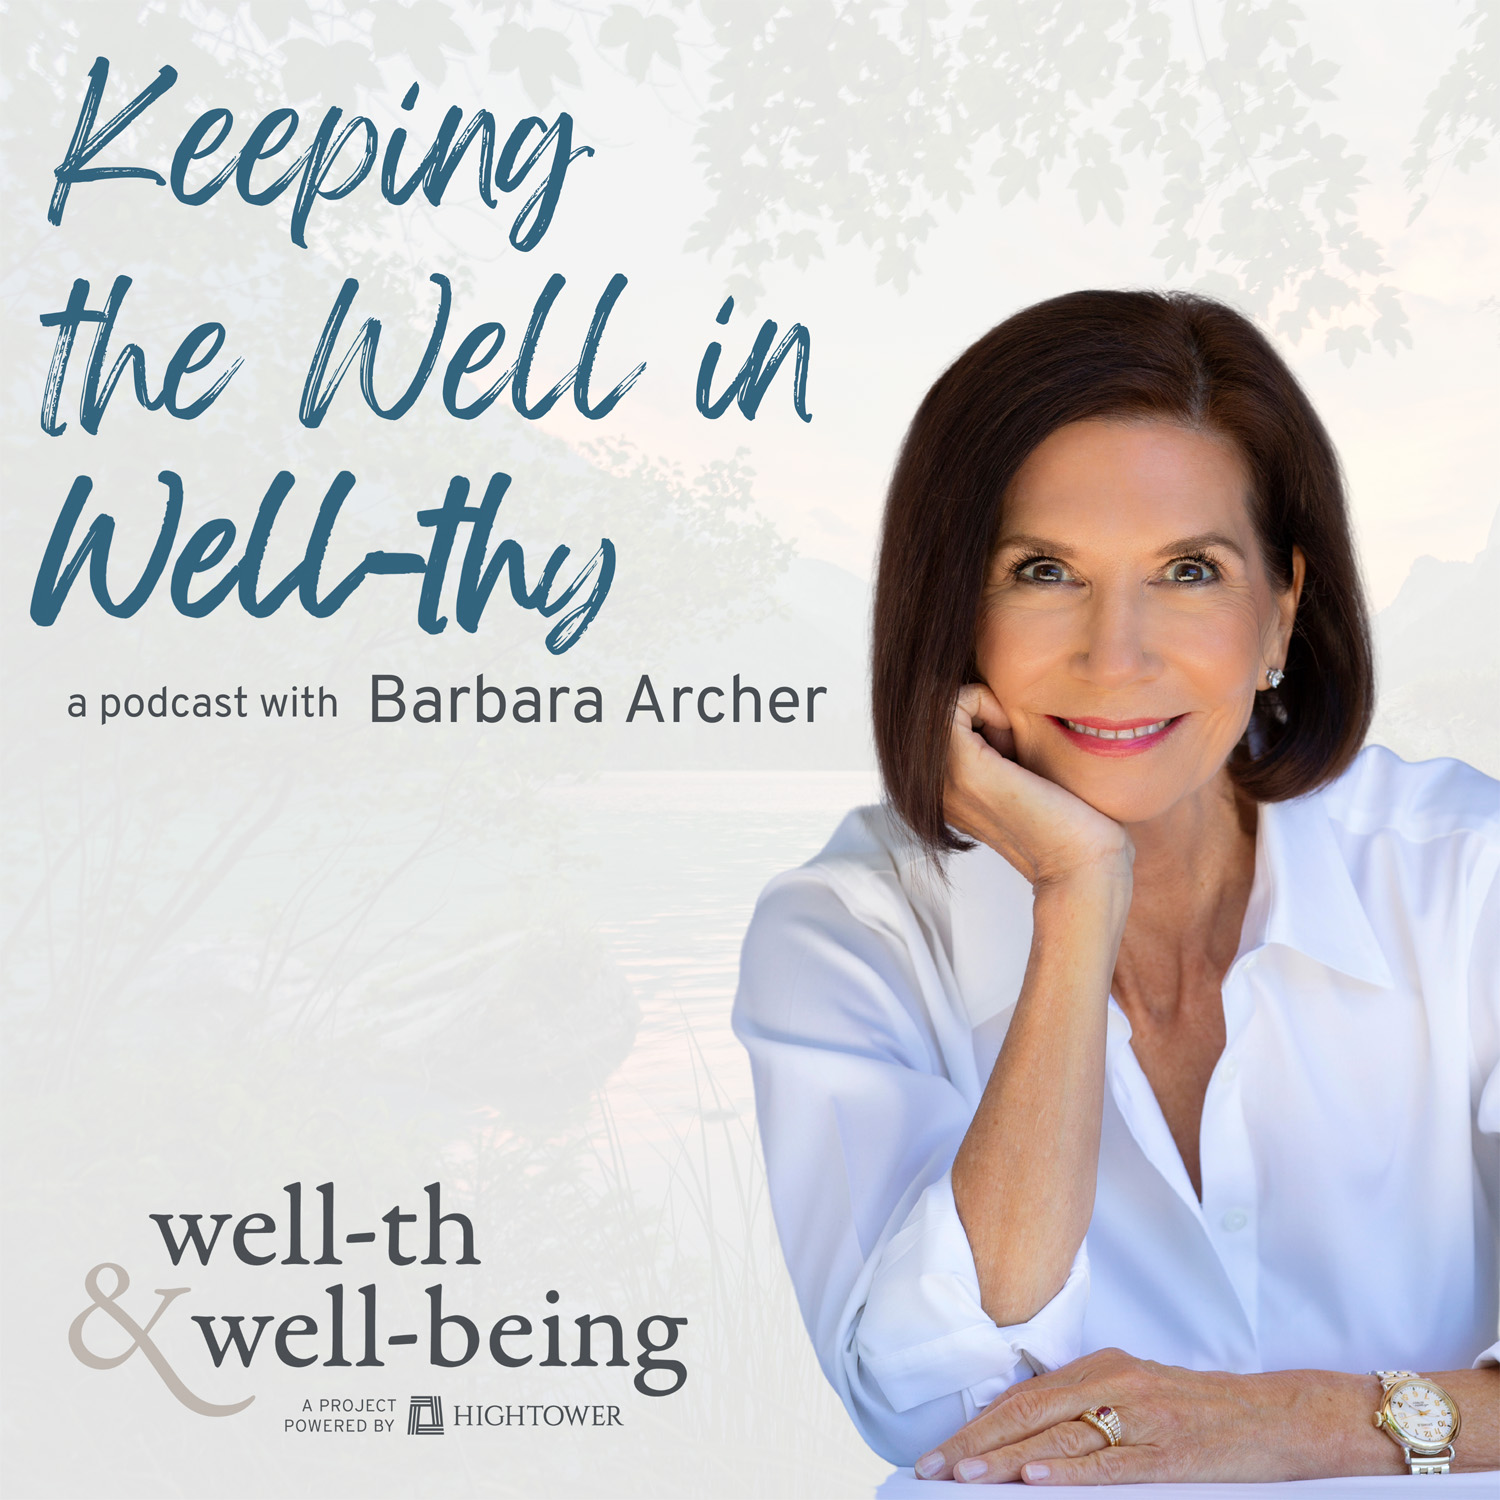 Artwork for podcast Keeping the Well in Well-thy